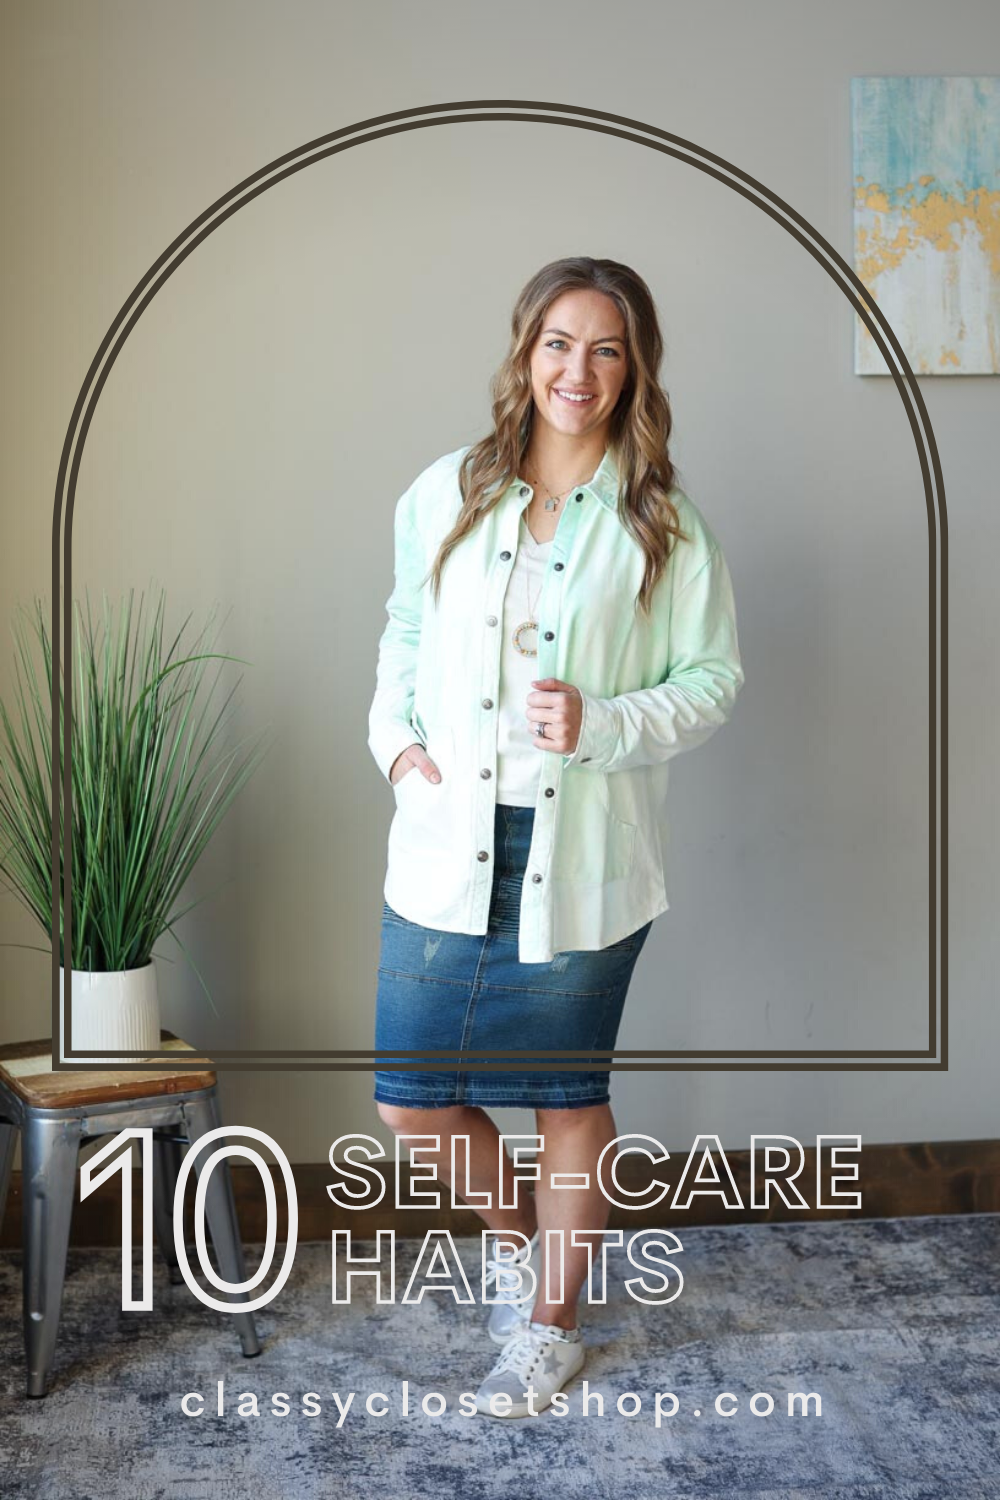 10 Self-Care Habits for Moms